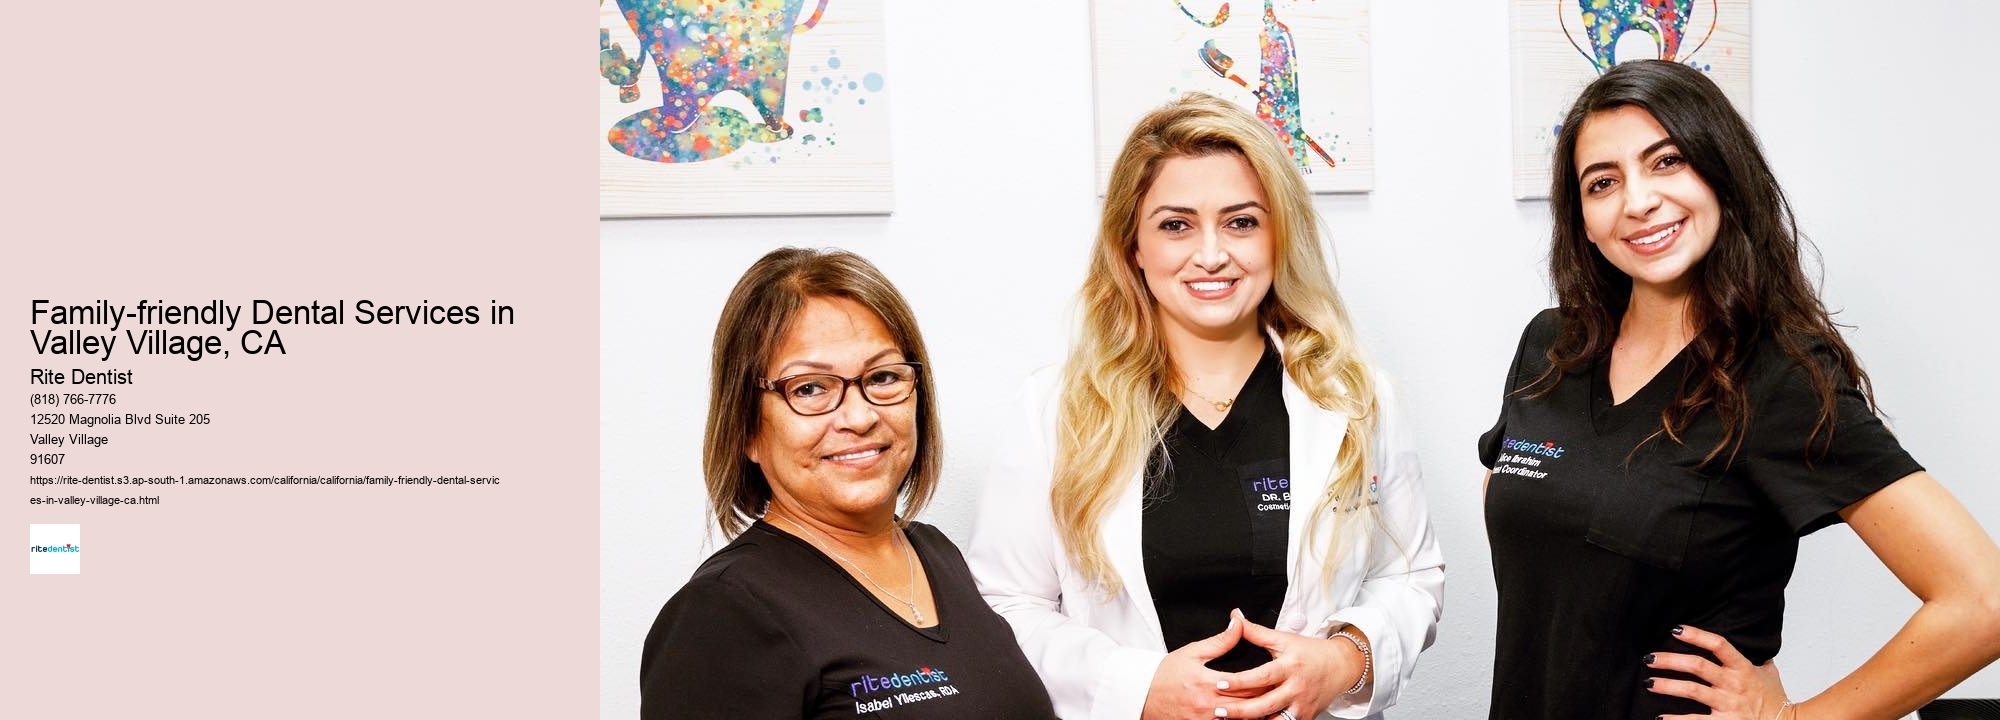 Family-friendly Dental Services in Valley Village, CA